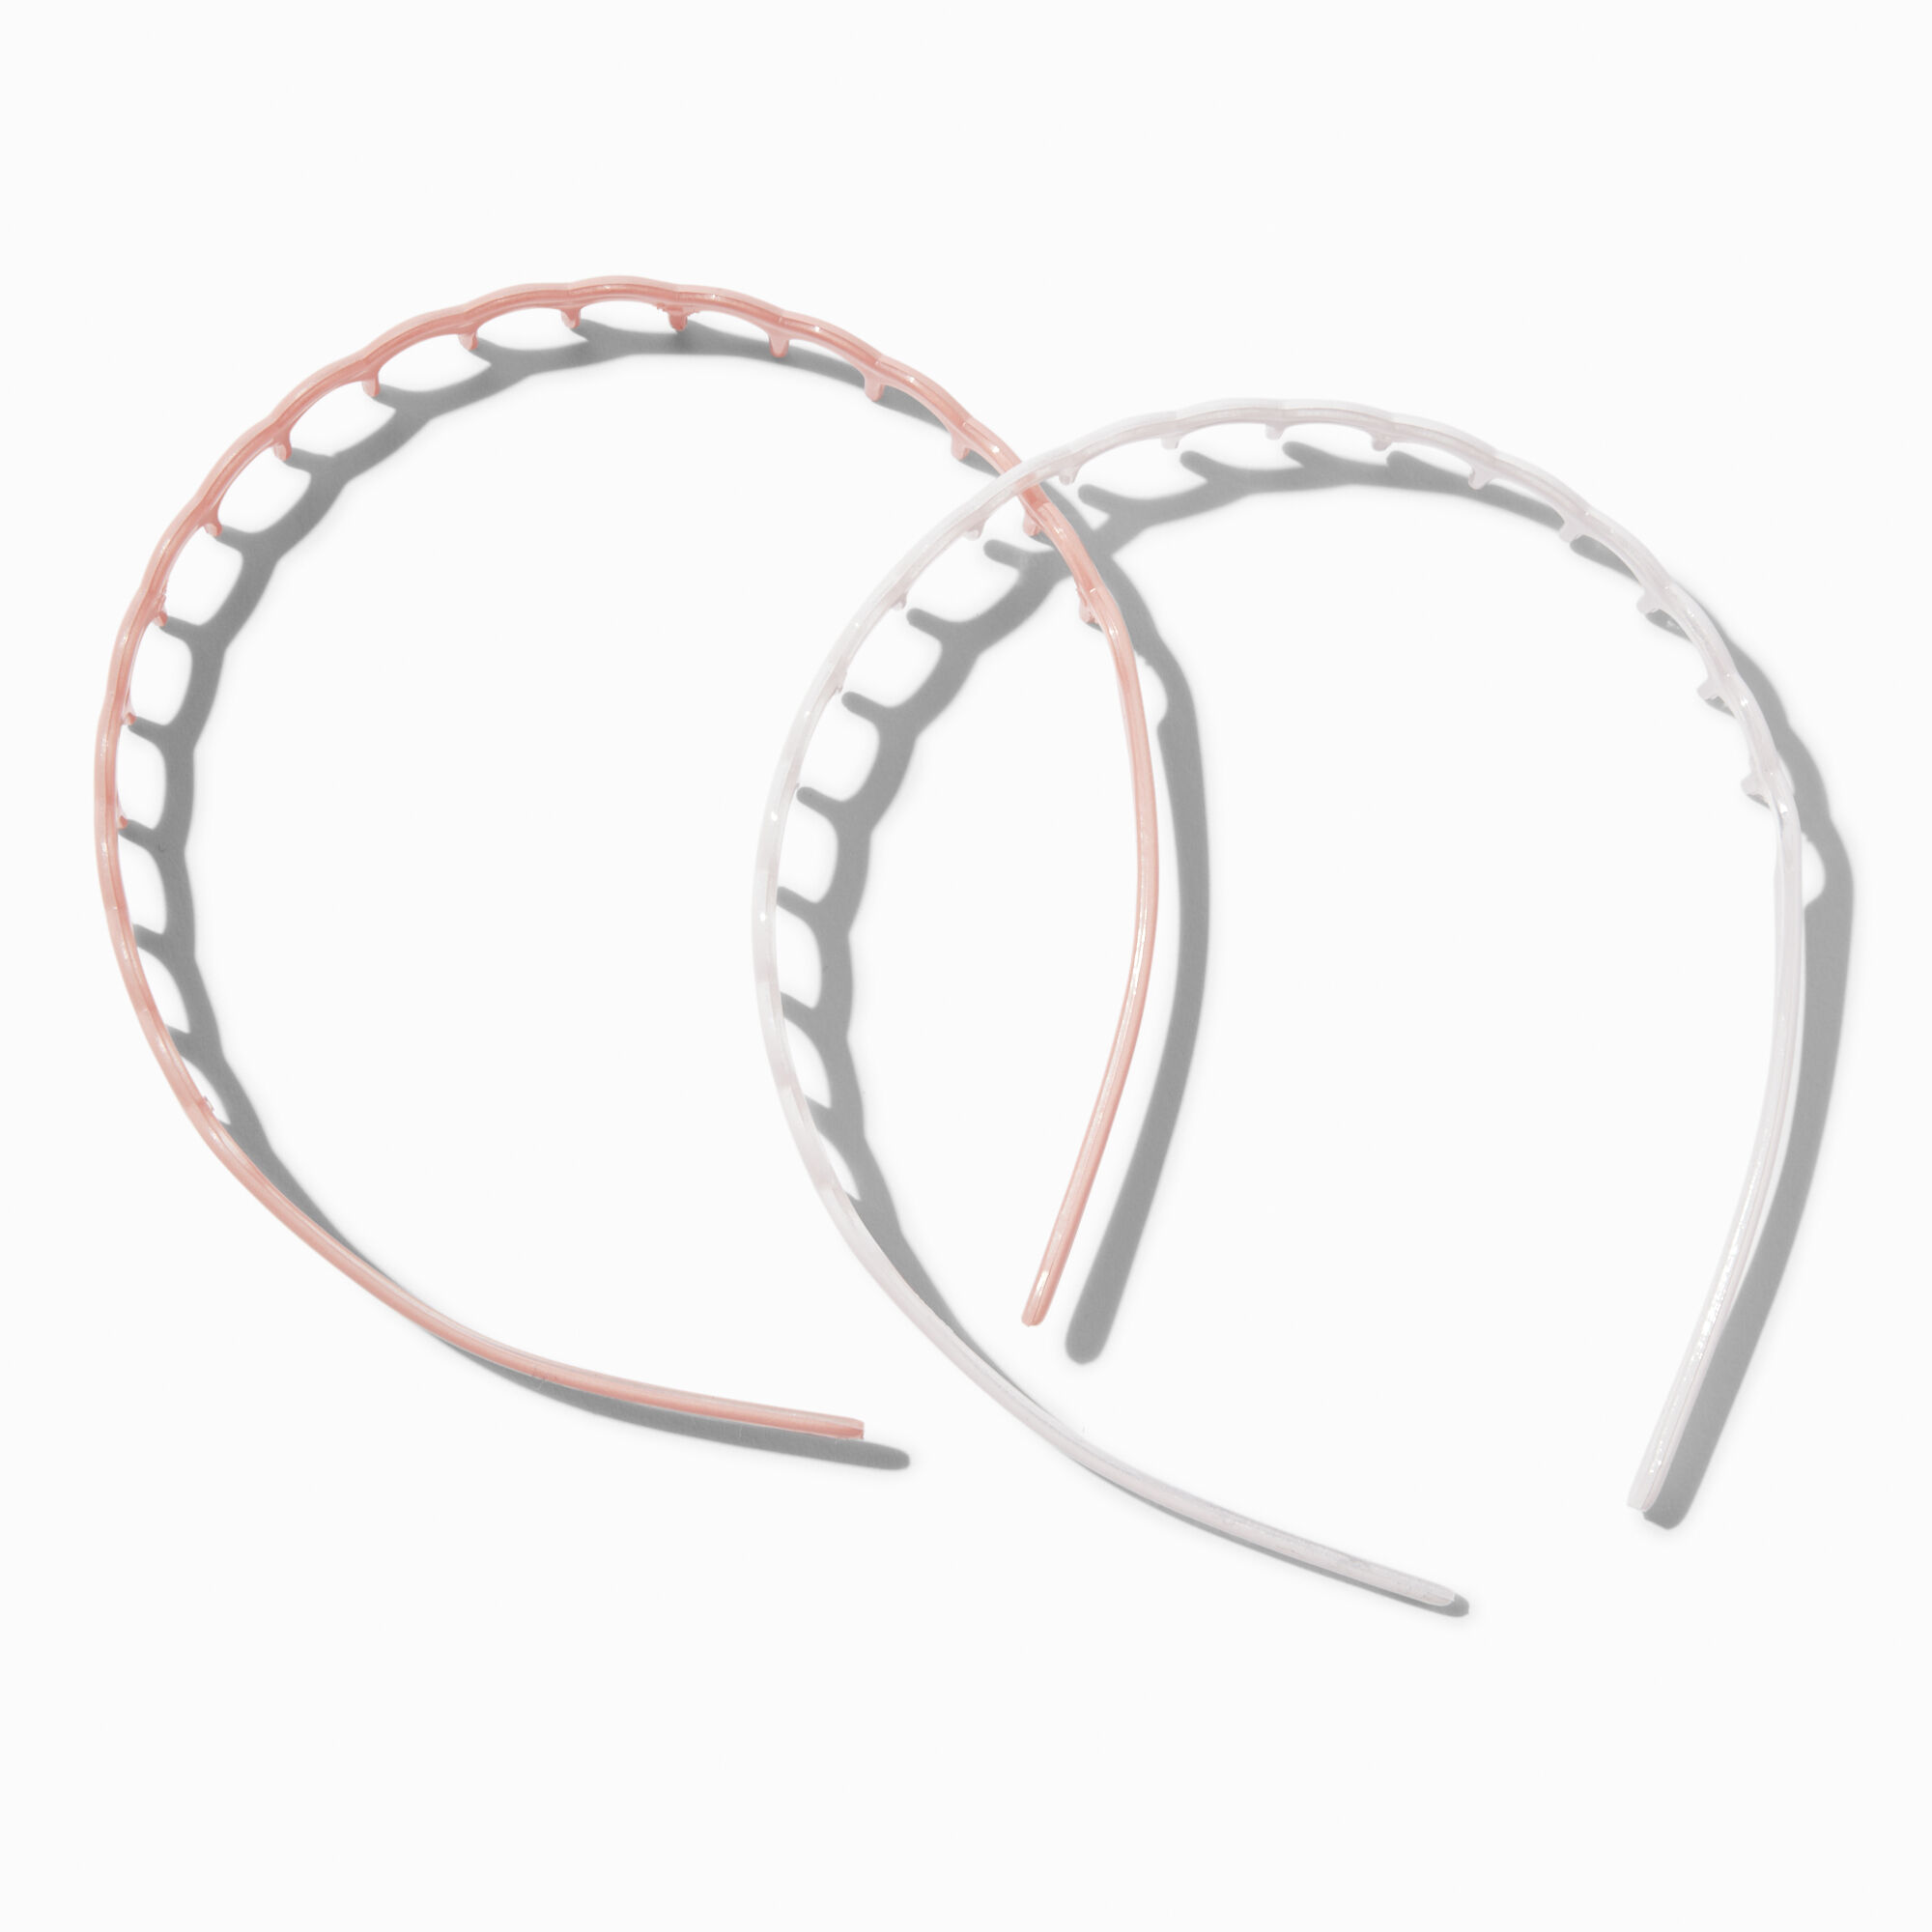 View Claires Pink Scalloped Headbands 2 Pack White information